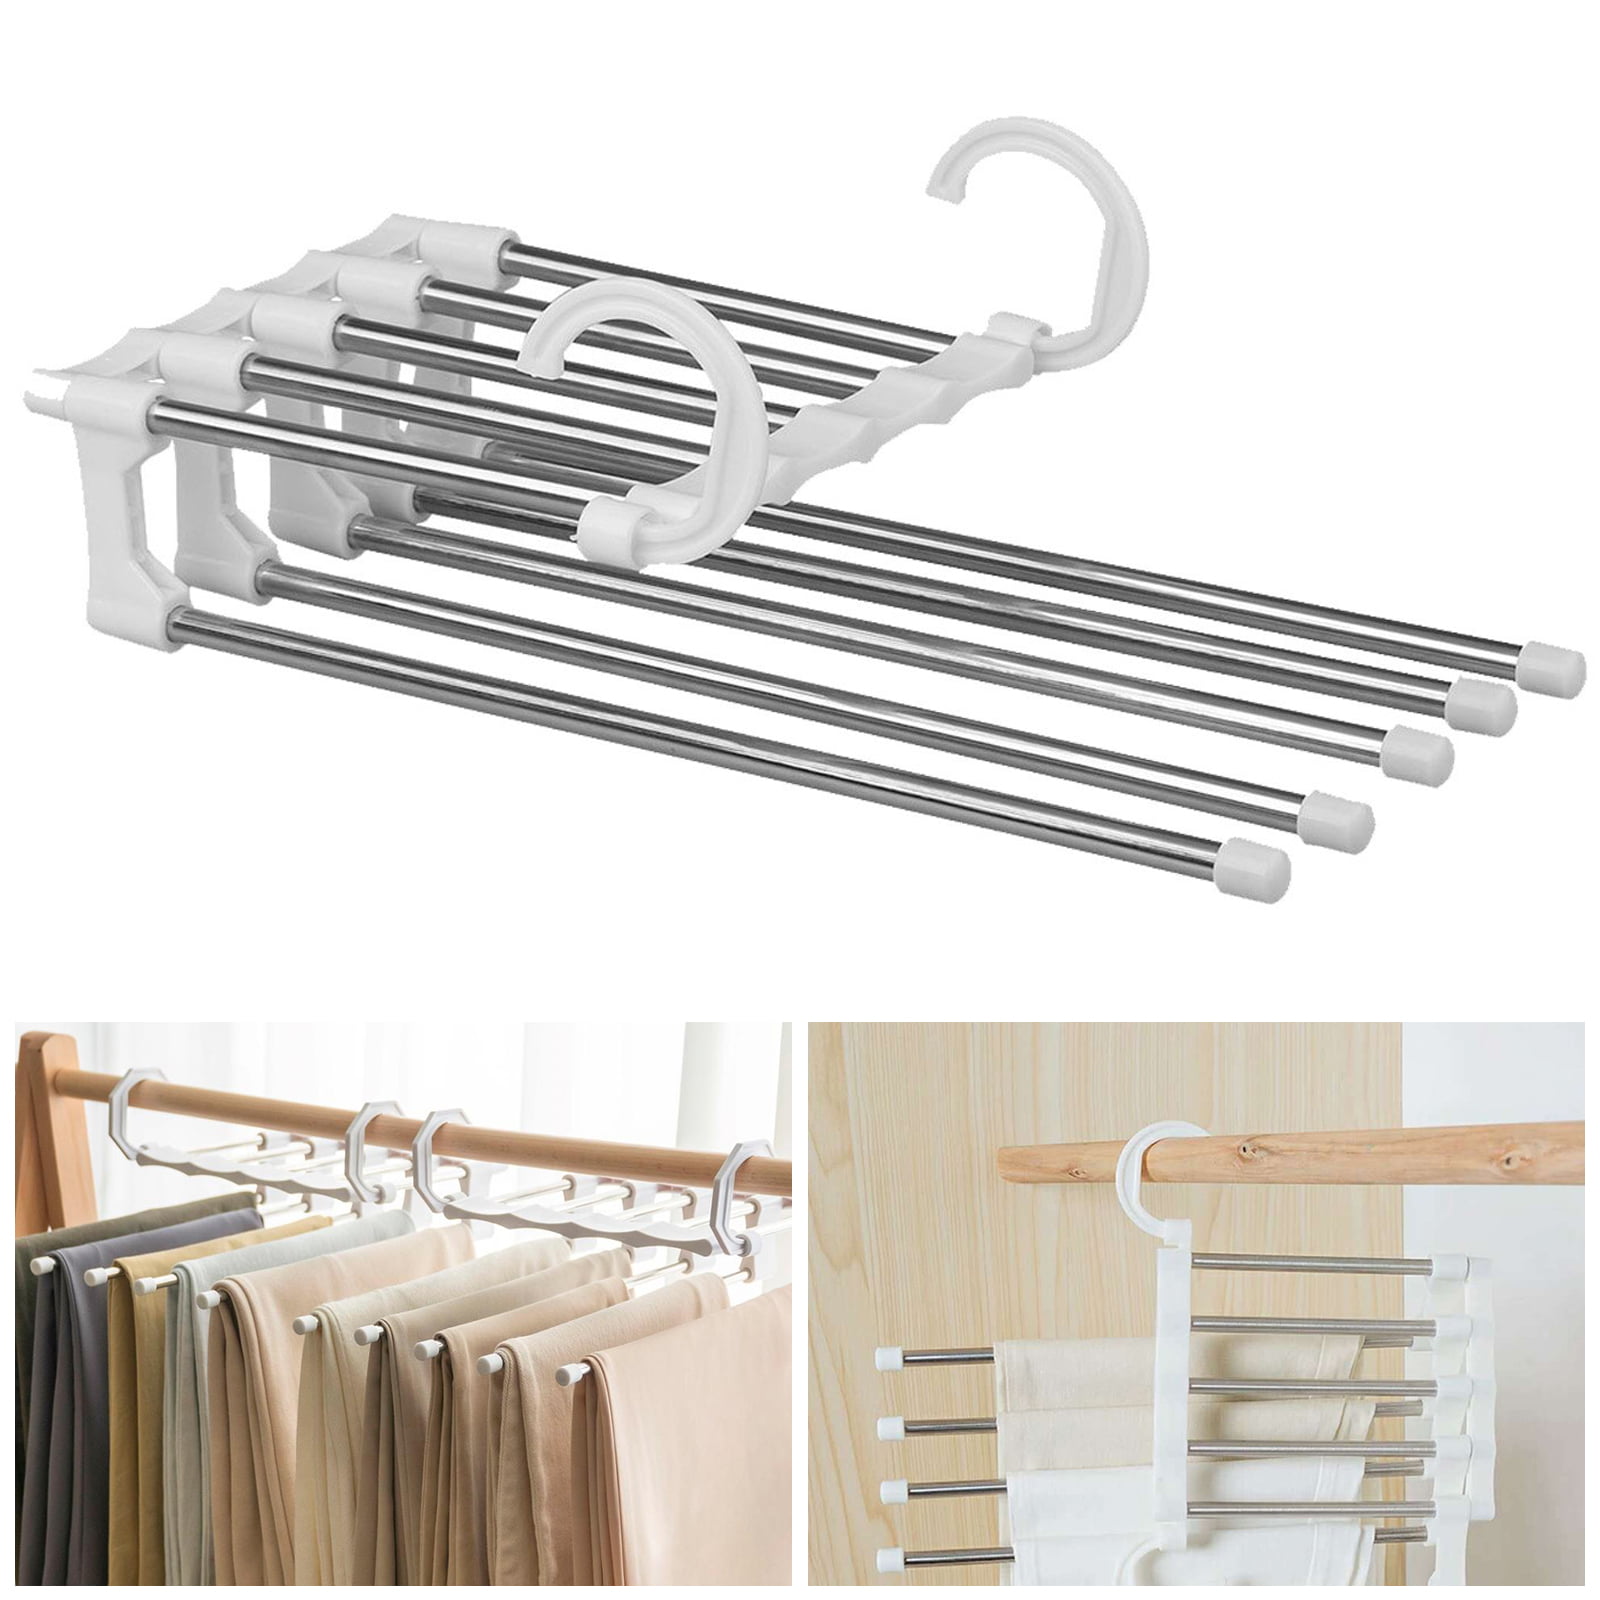 Yuanbbo Multi-function Stainless Steel Foldable Clothes Trouser Magic Hanger Space Saver Storage Rack for Hanging 5 In 1